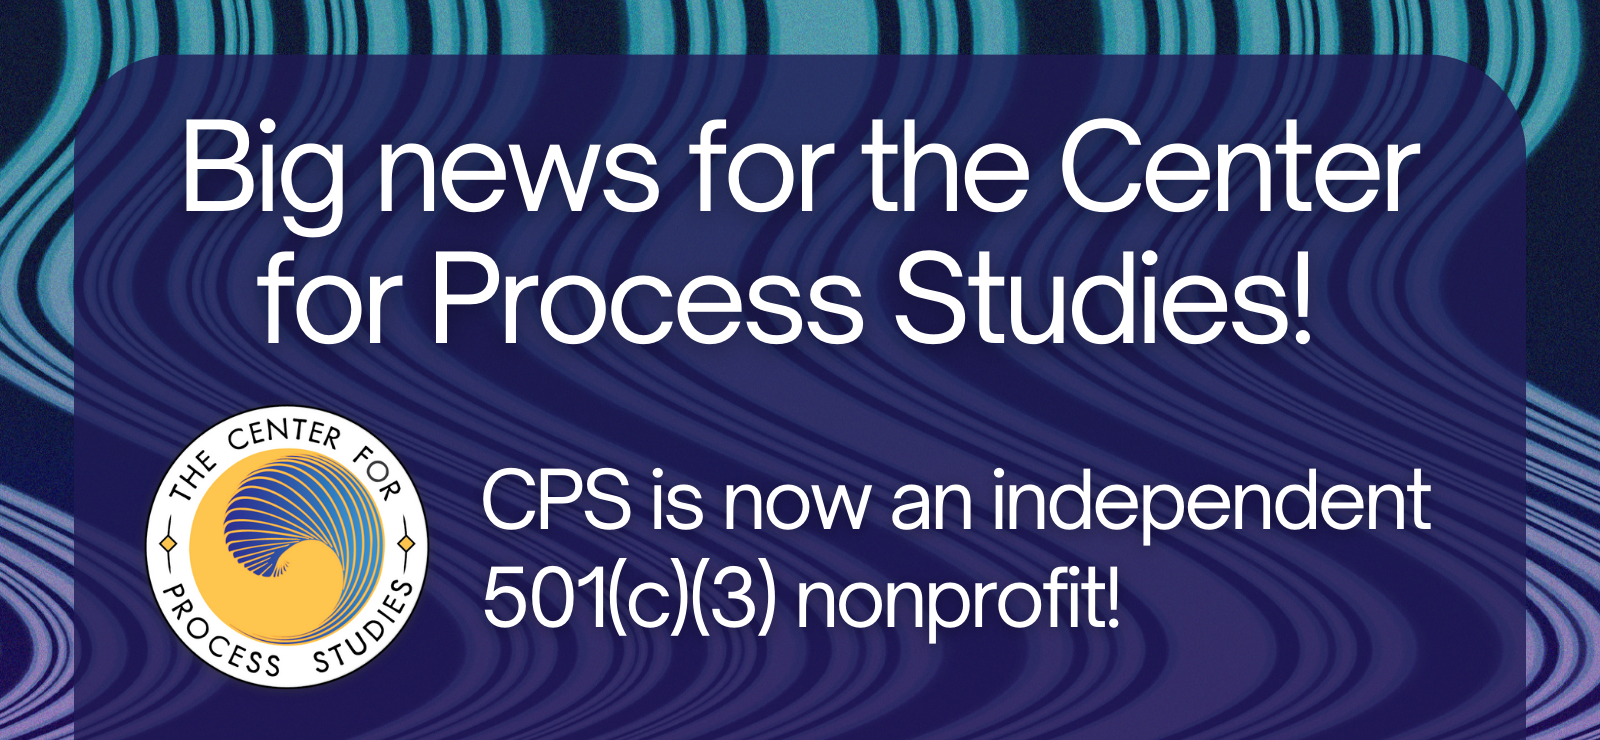 The Center for Process Studies is now an independent 501(c)(3) nonprofit!